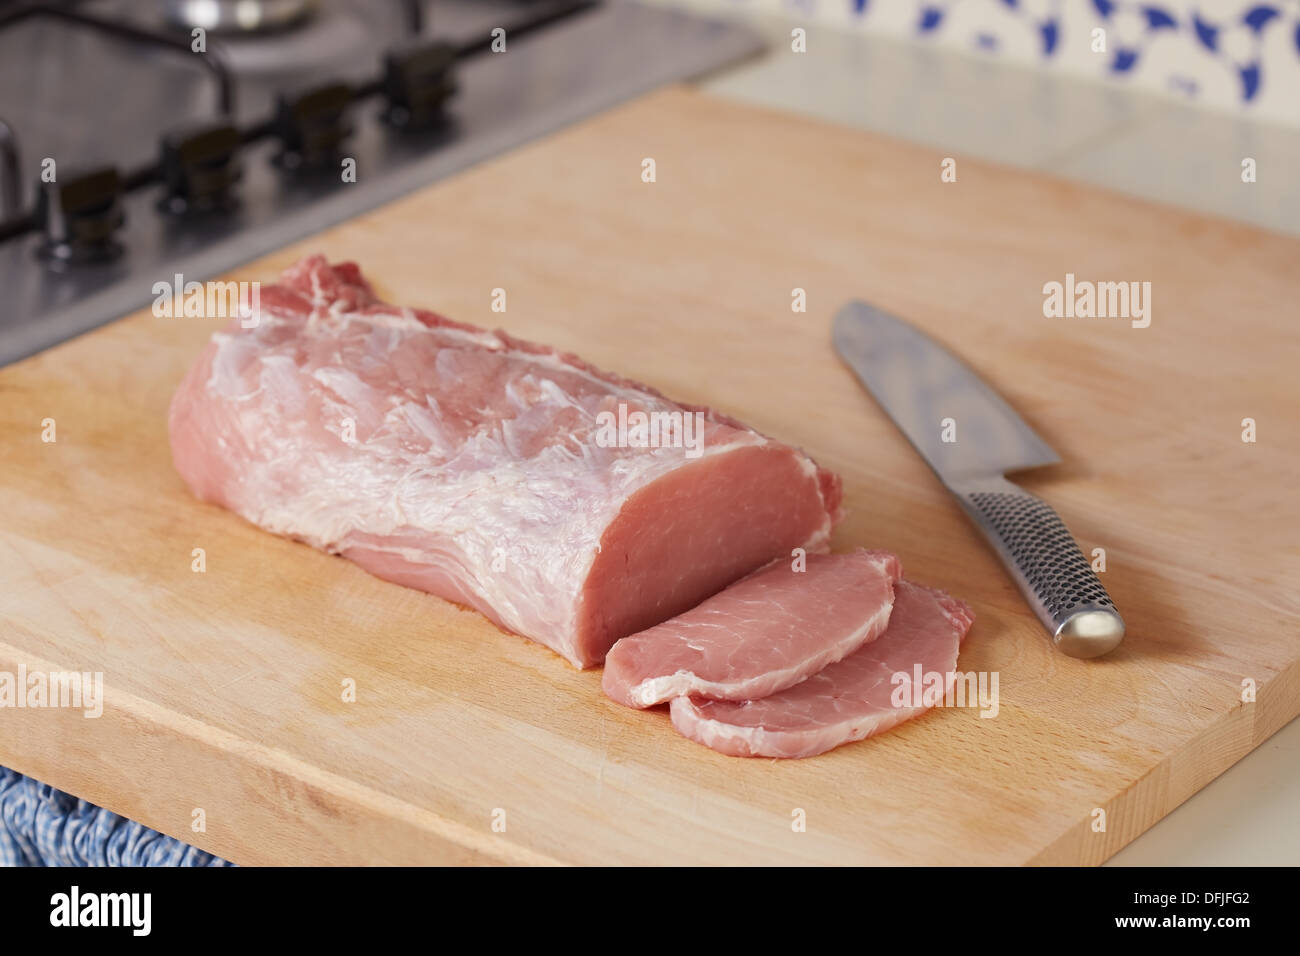 Cutting whole raw pork loin at home Stock Photo